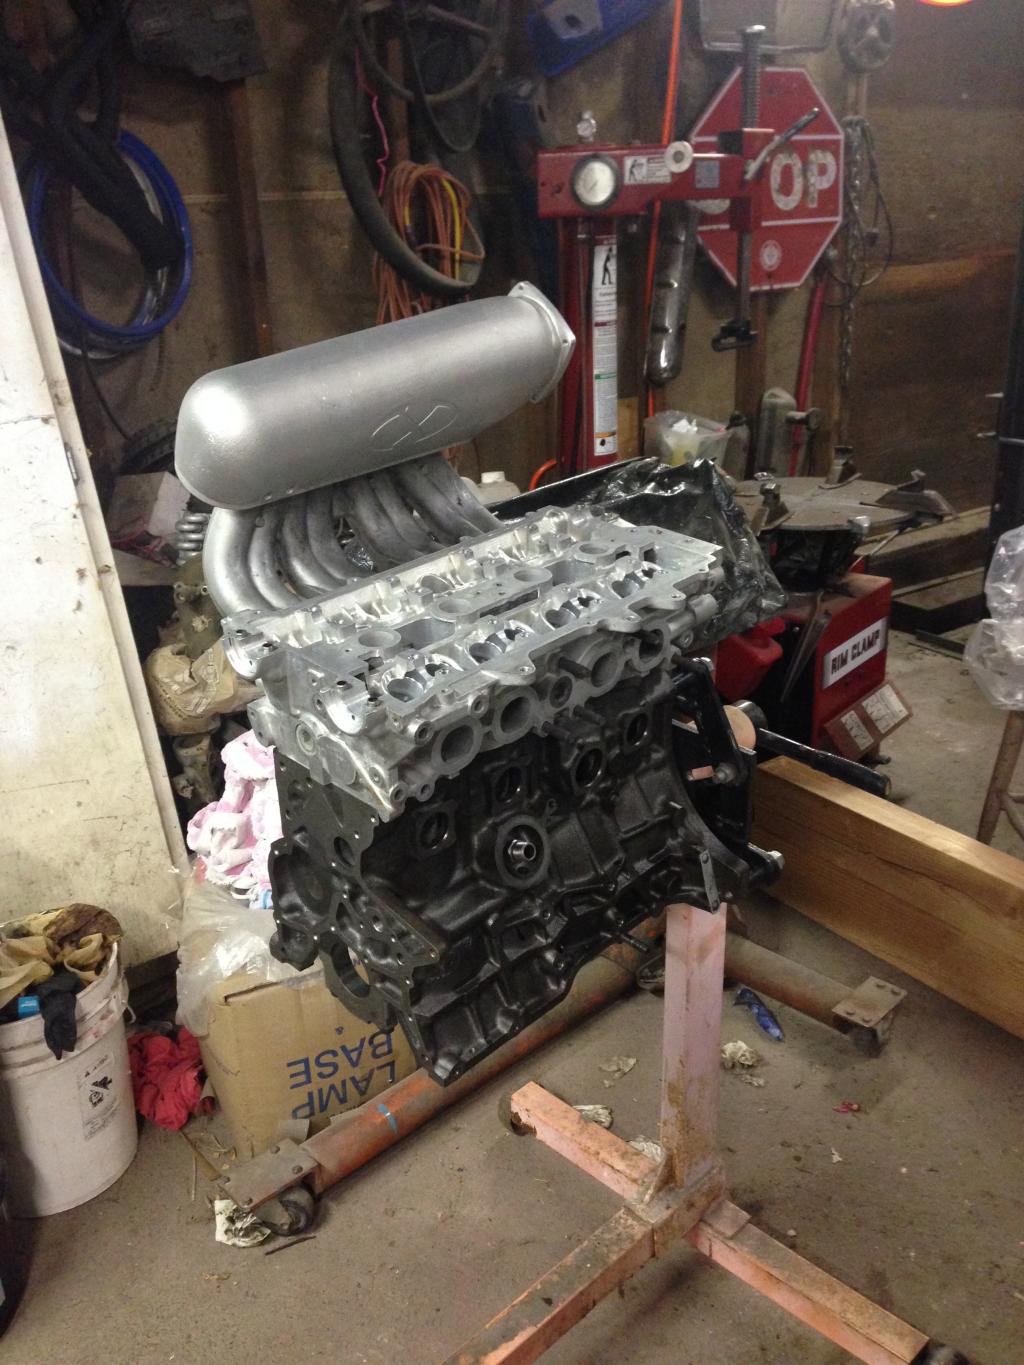  5S-FE Block with 3S-GTE head cleaned up